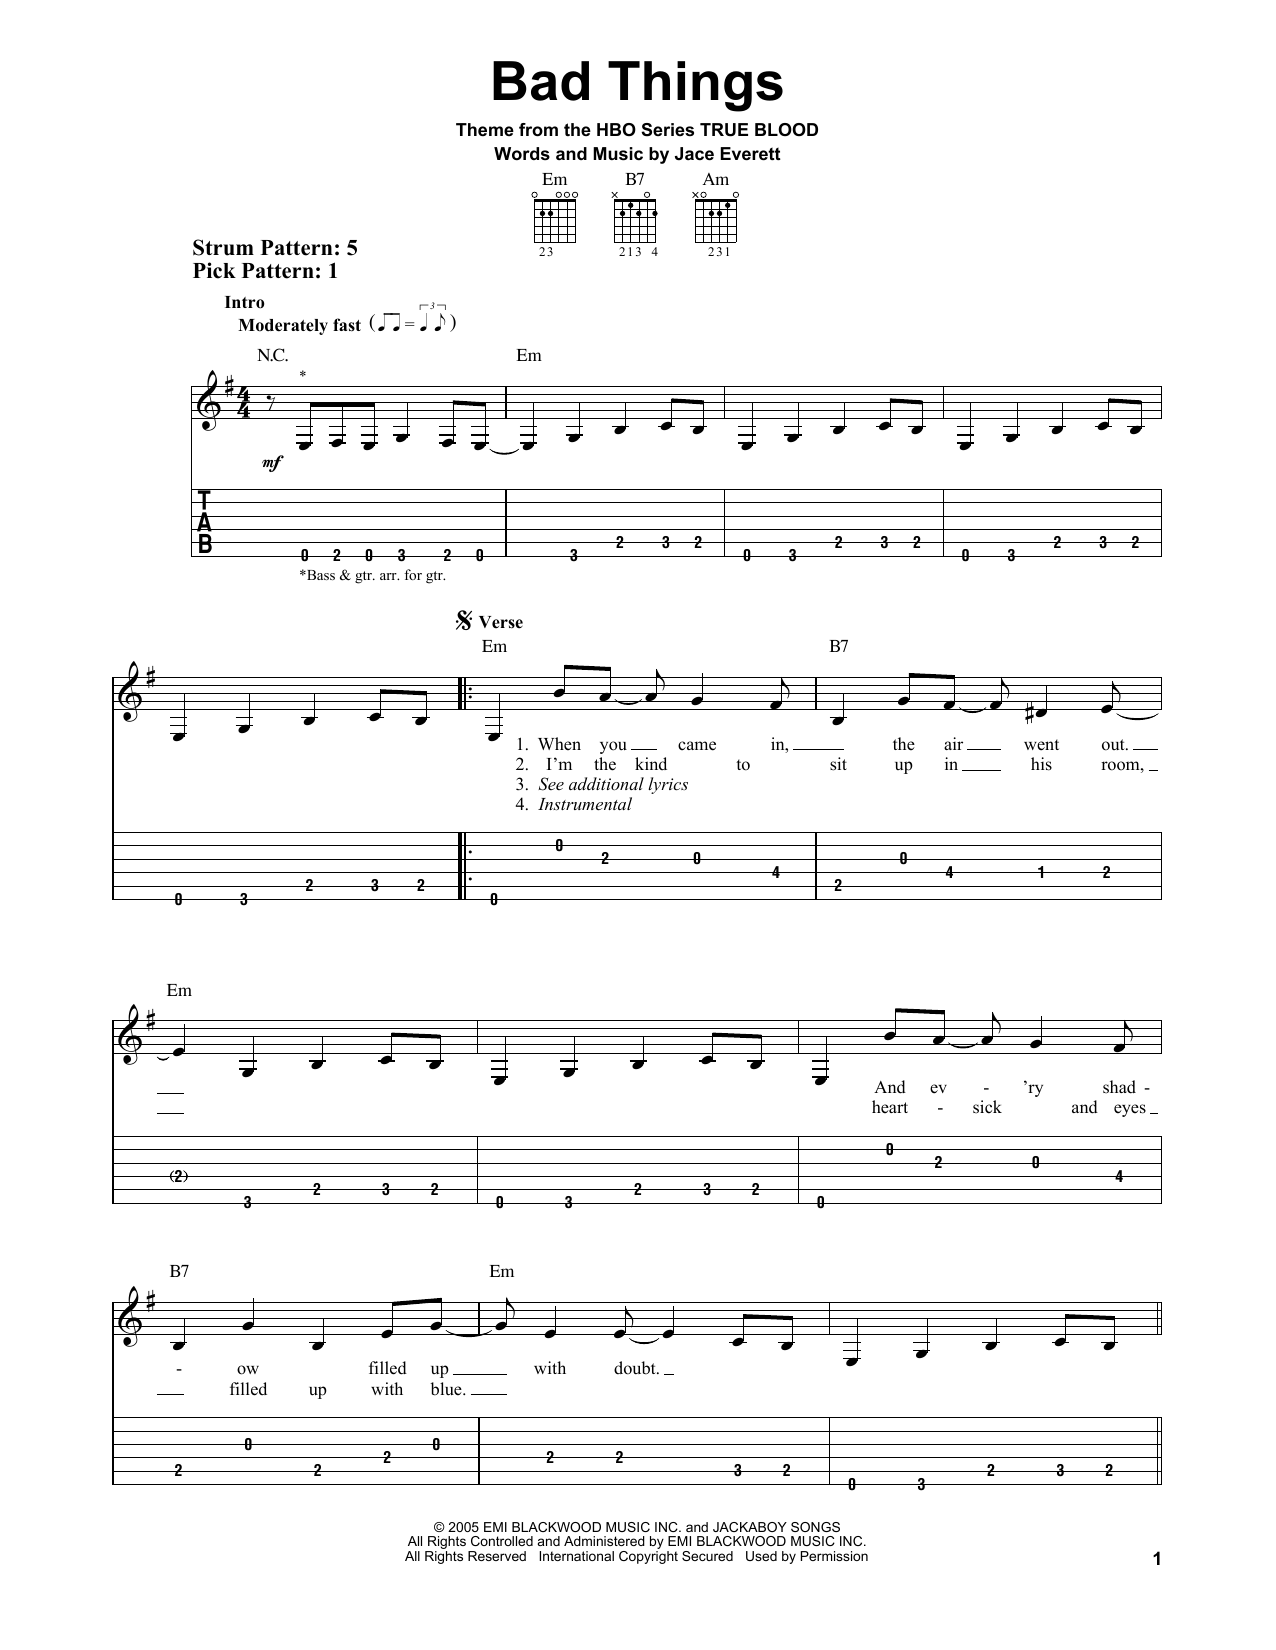 Download Jace Everett Bad Things Sheet Music